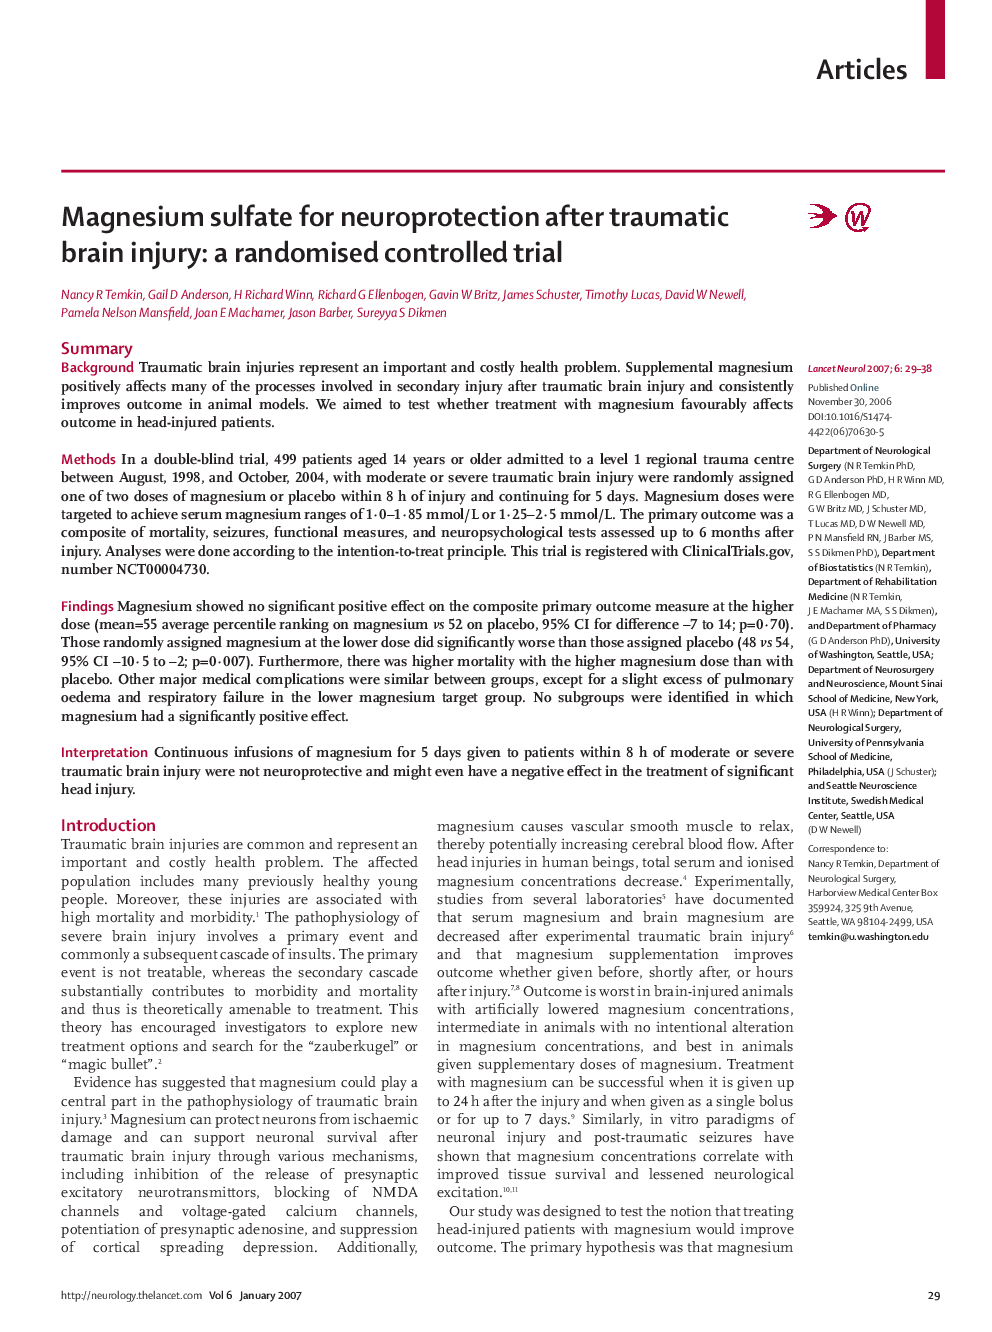 Magnesium sulfate for neuroprotection after traumatic brain injury: a randomised controlled trial